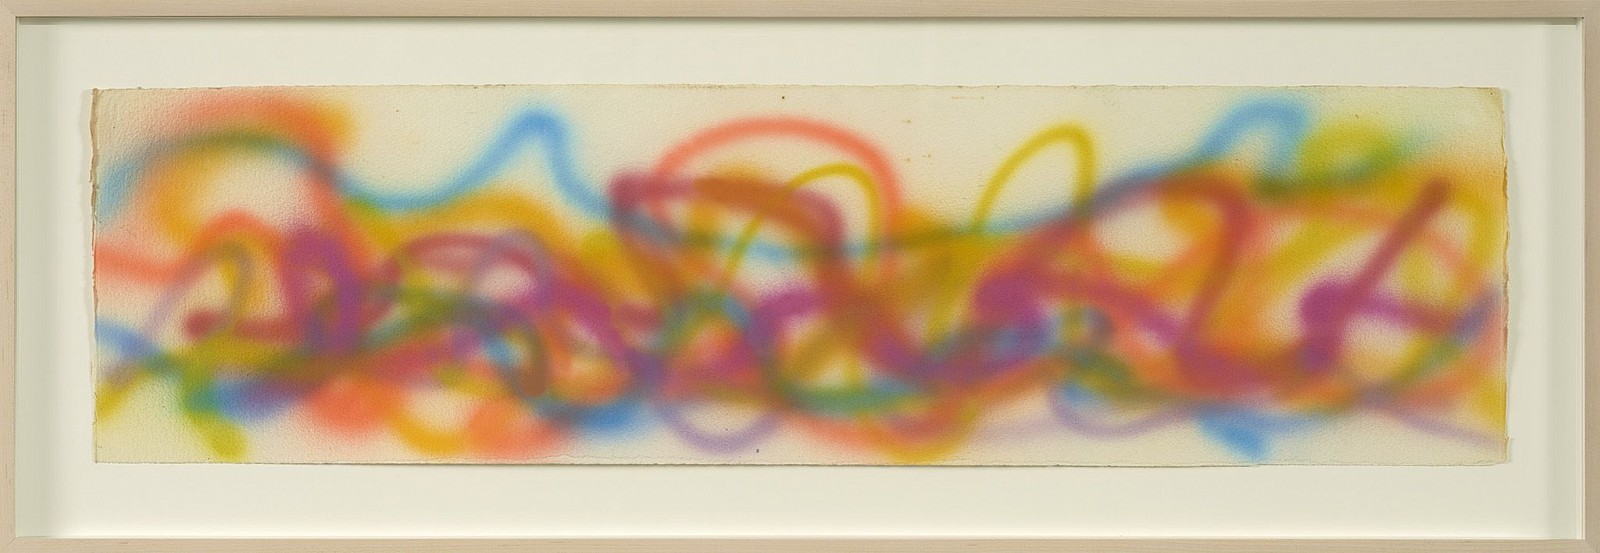 Dan Christensen, Untitled, 1968
Acrylic on Arches paper, 11 1/2 x 41 1/2 in. (29.2 x 105.4 cm)
CHR-00287